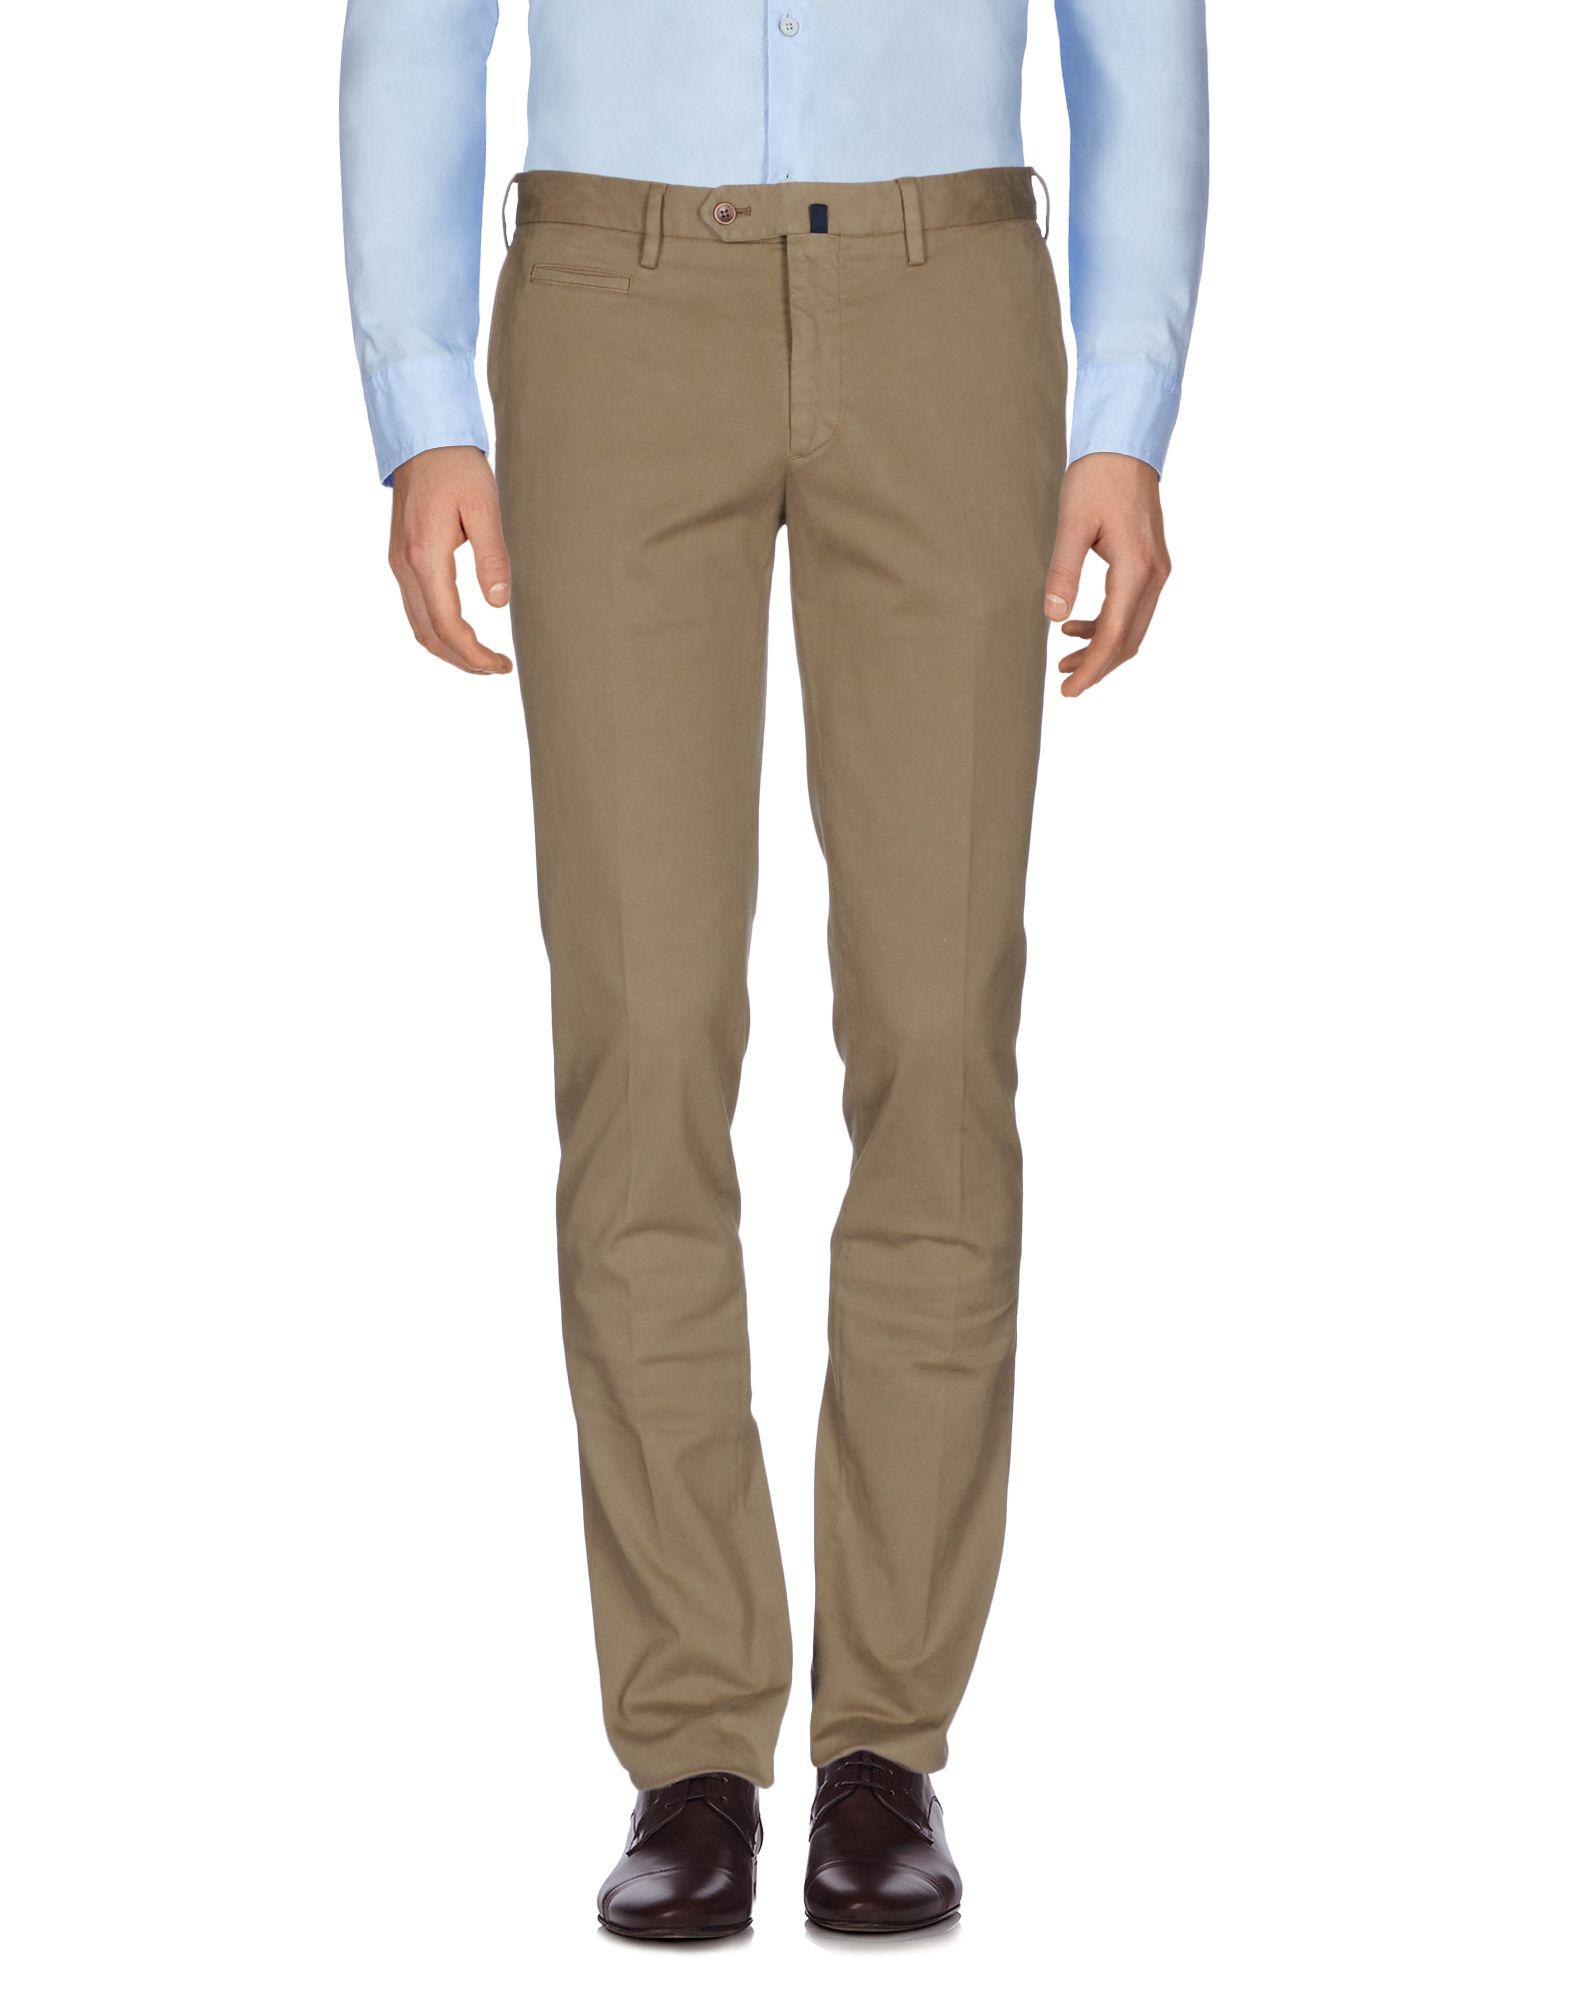 Incotex Cotton Casual Pants in Khaki (Natural) for Men - Lyst